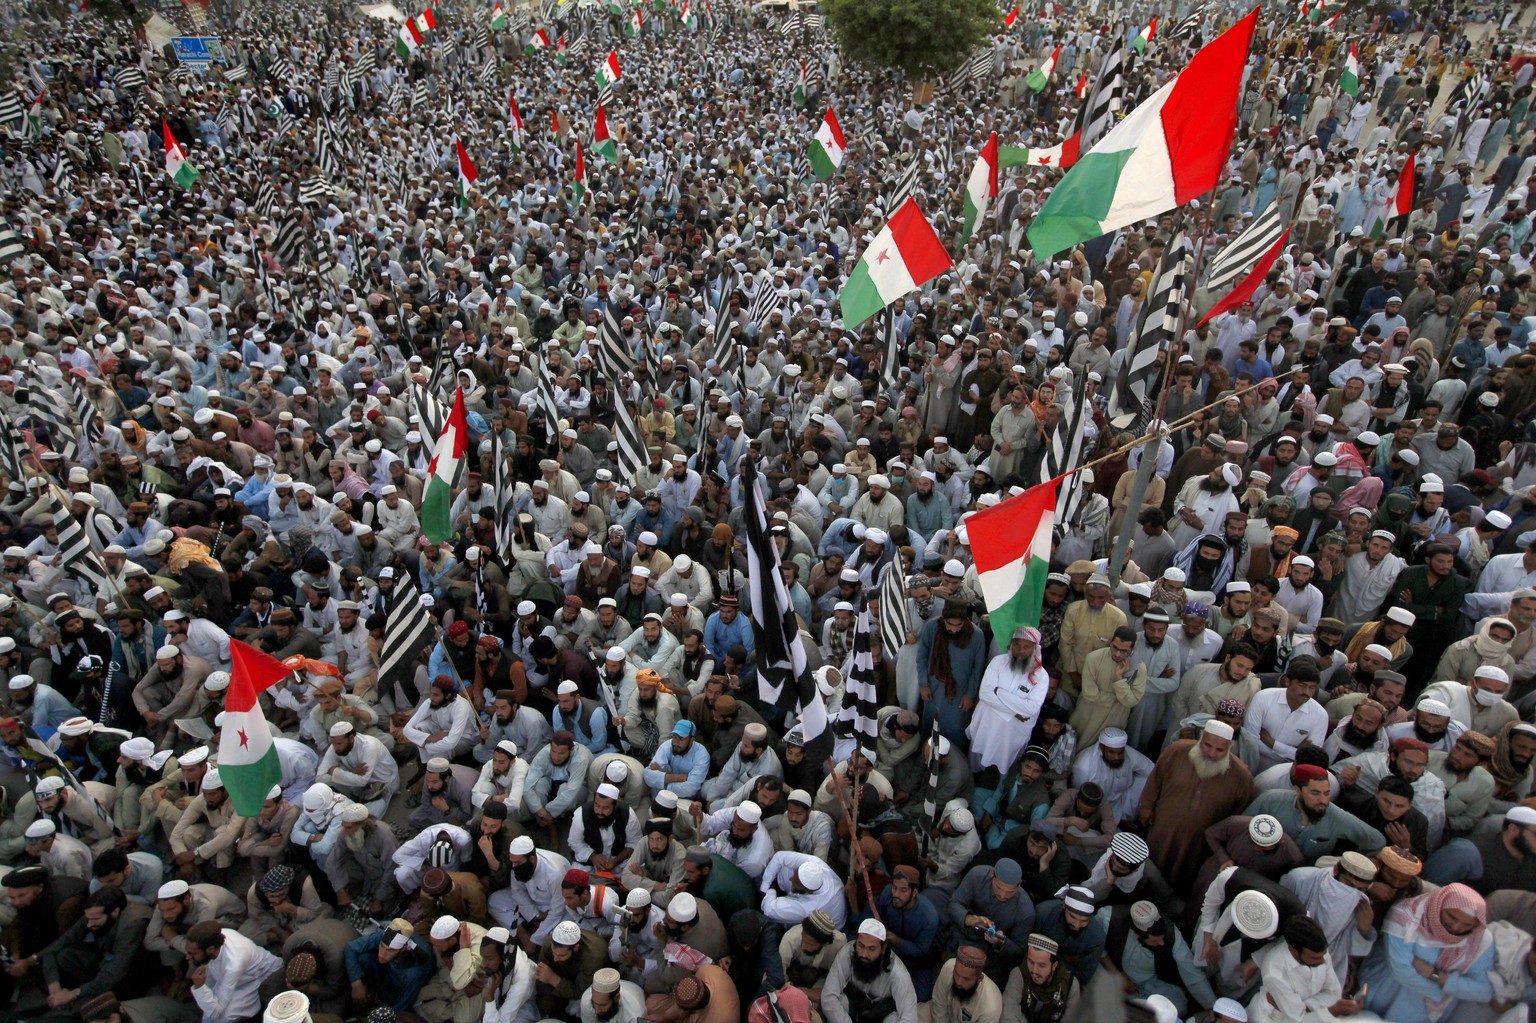 Supporters of the Jamiat Ulema-e-Islam party participate in an anti-government march, in Islamabad, Pakistan, Sunday, Nov. 3, 2019. Tens of thousands of Islamists at a massive protest camp in Pakistan ...